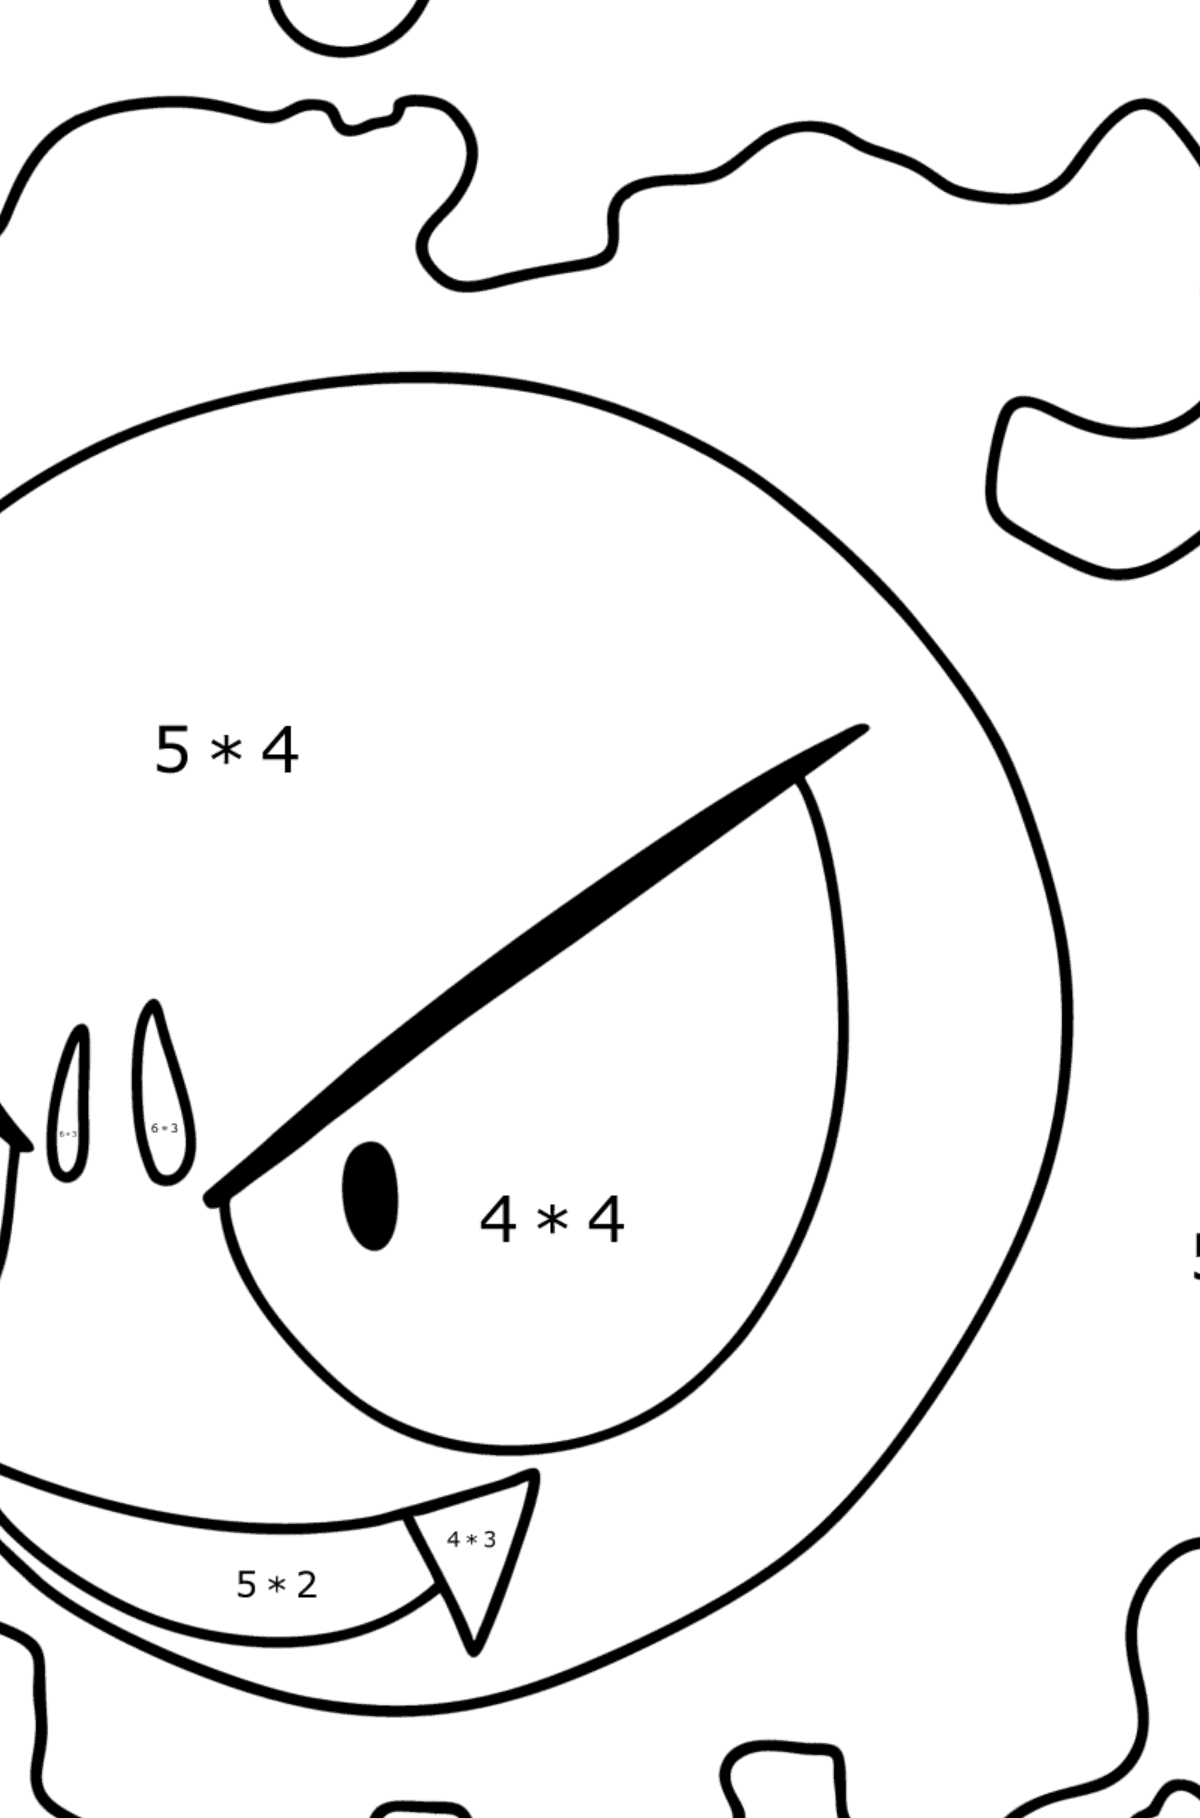 Pokémon Go Gastly coloring page - Math Coloring - Multiplication for Kids